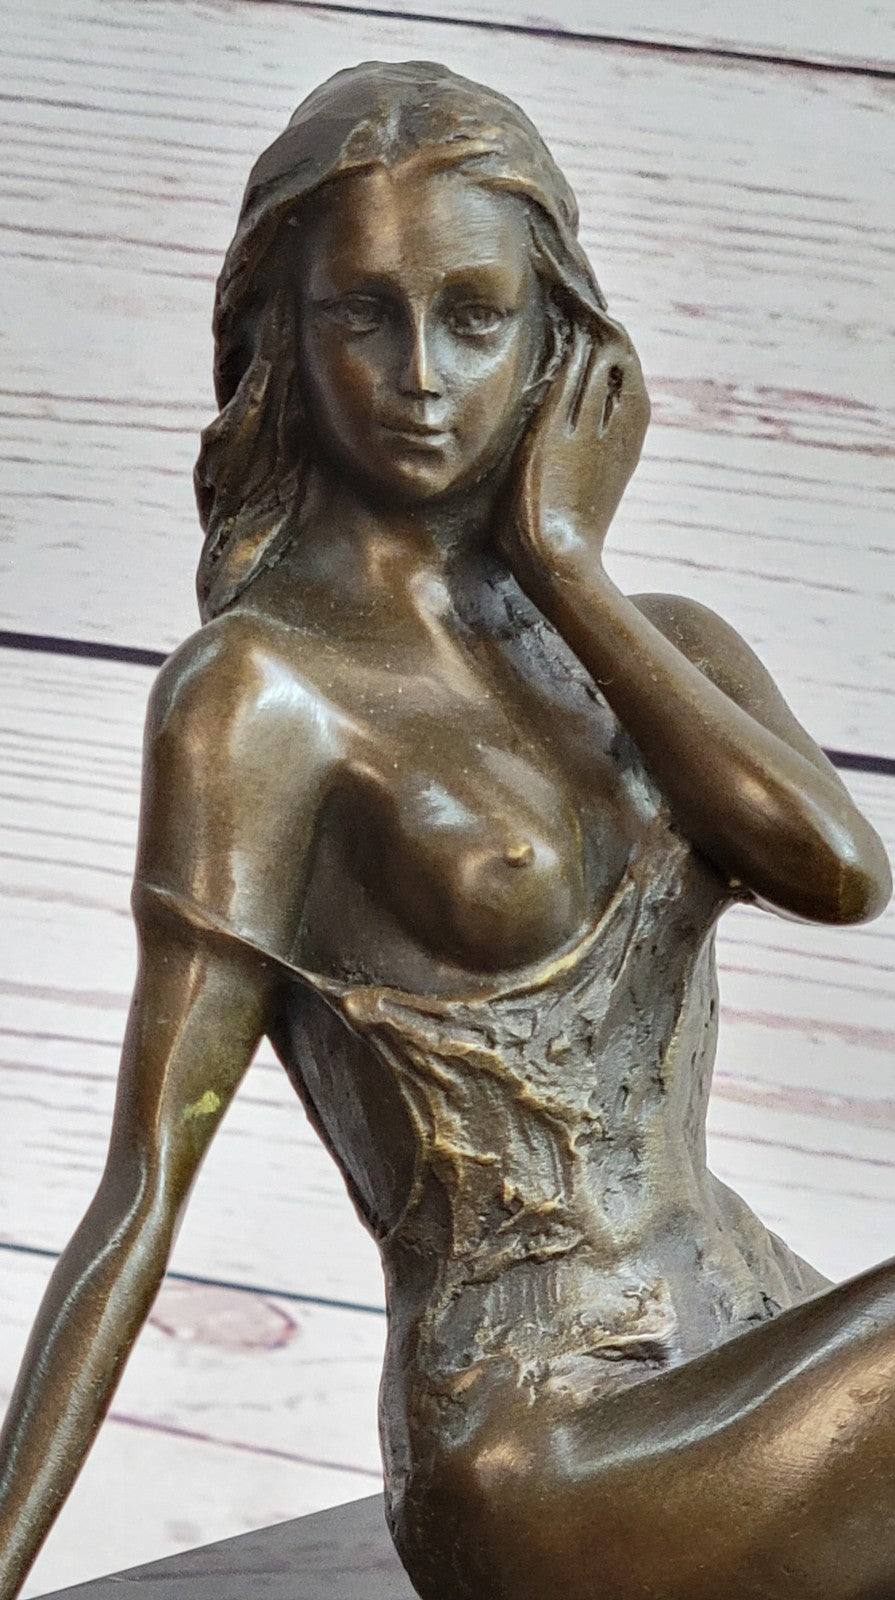 Signed Original Artwork Abstract Nude Female Bronze Marble Sculpture Statue Sale